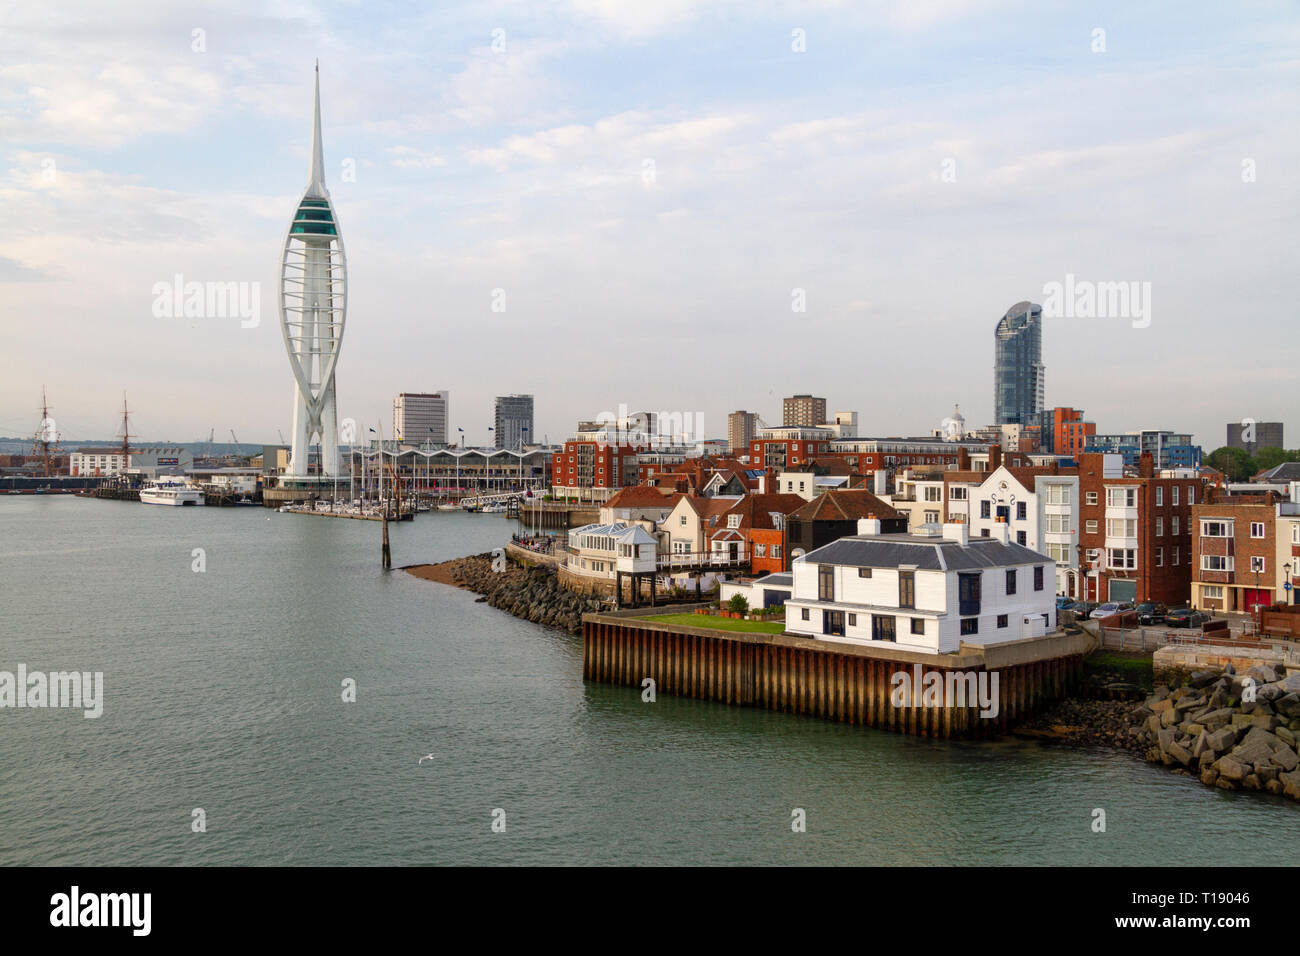 General view during arrival at Portsmouth Harbour, Hampshire, England with the Spinnaker Tower in the distance. Stock Photo